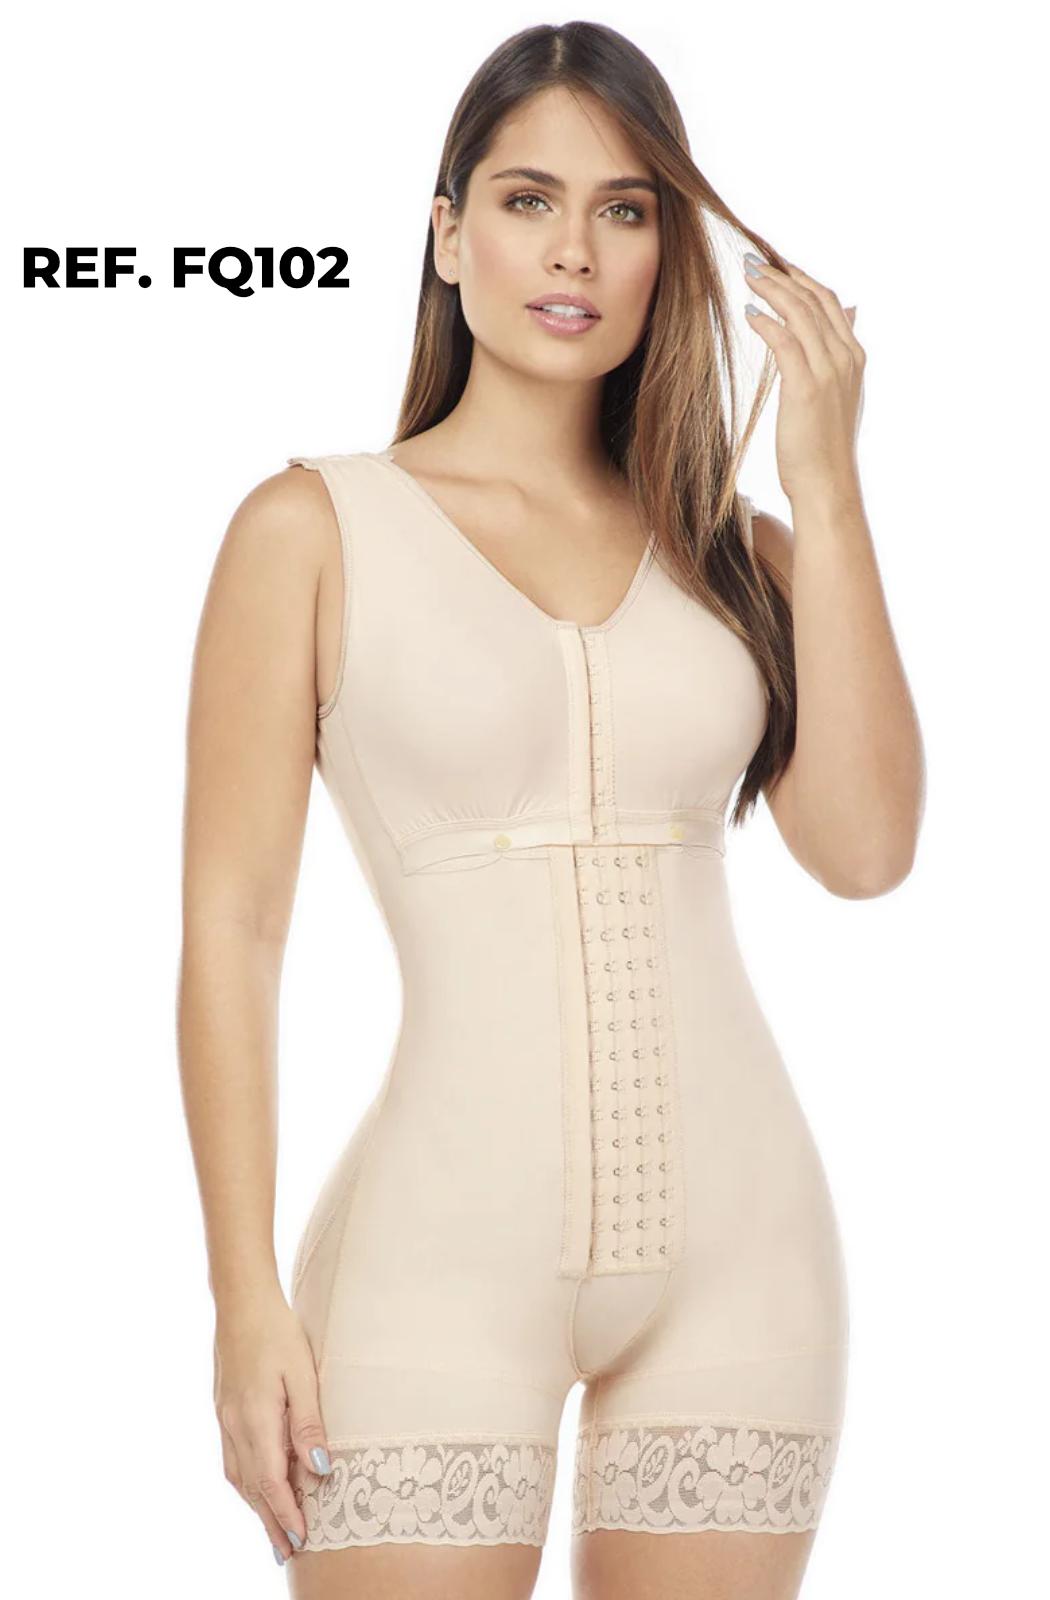 Short Girdle with Post-Surgical Butt Lift Bra